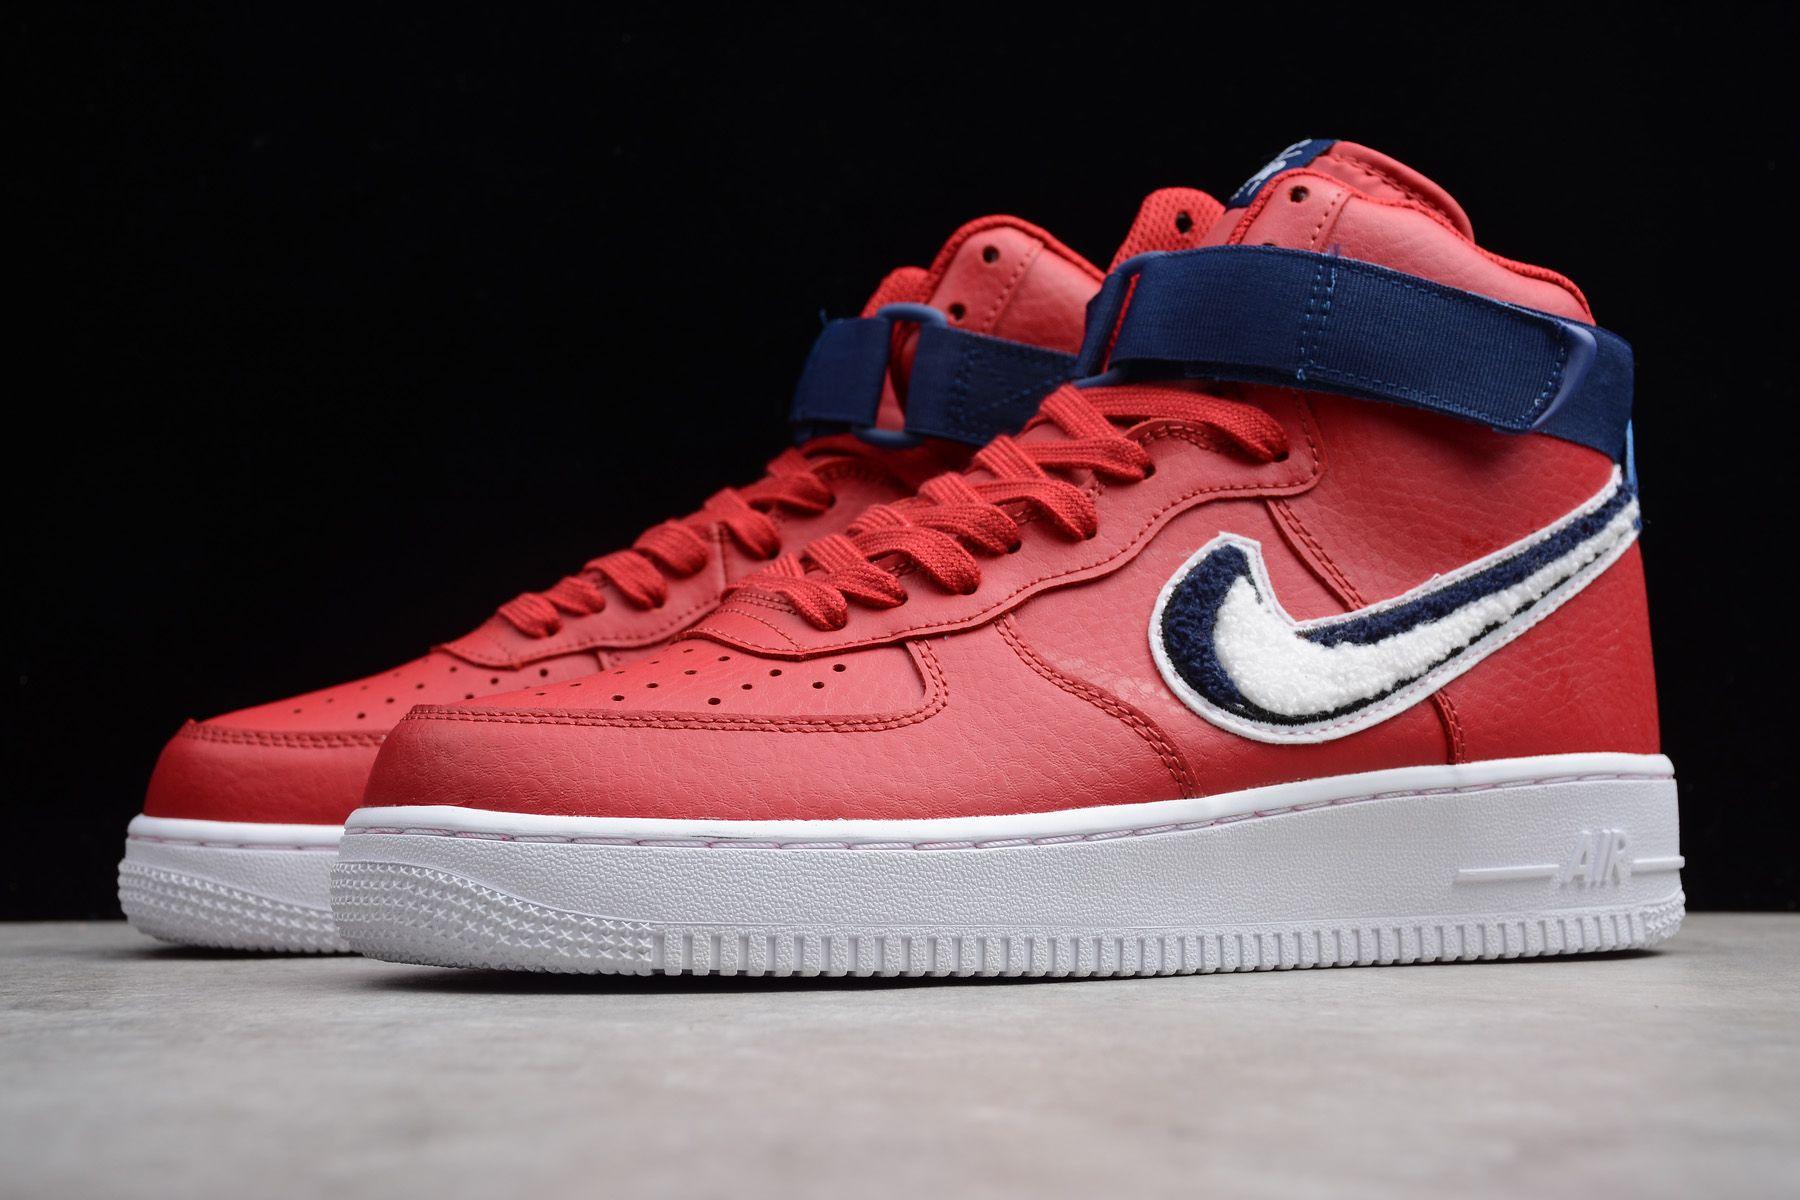 Red White Nike Logo - Nike Air Force 1 High '07 LV8 “Chenille Swoosh” Gym Red/White-Blue ...